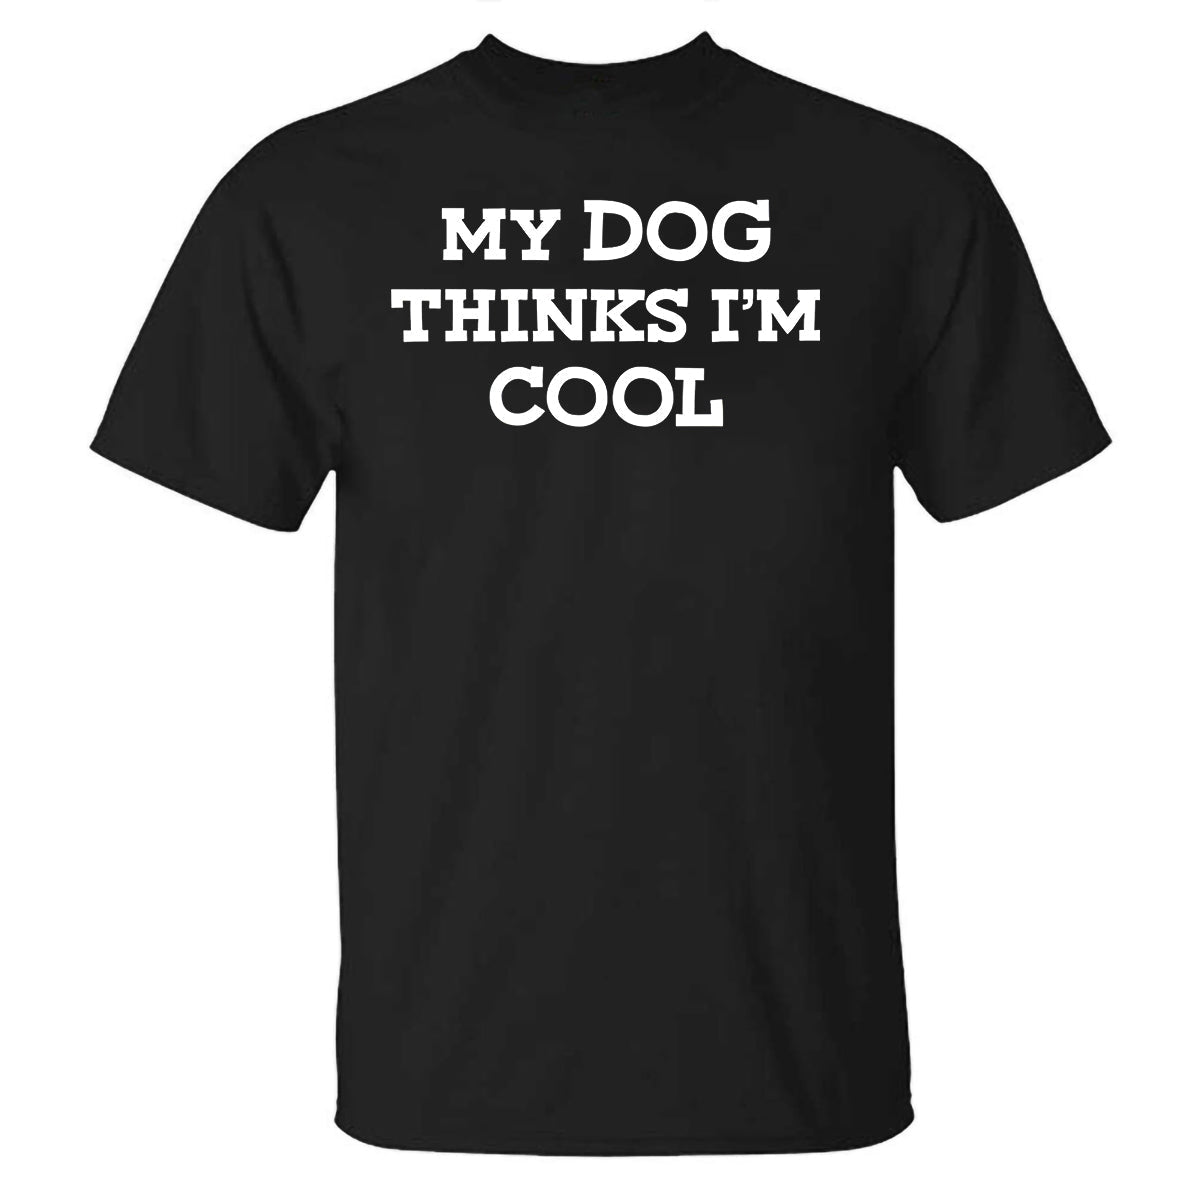 My Dog Thinks I'm Cool Printed T-shirt WOLVES